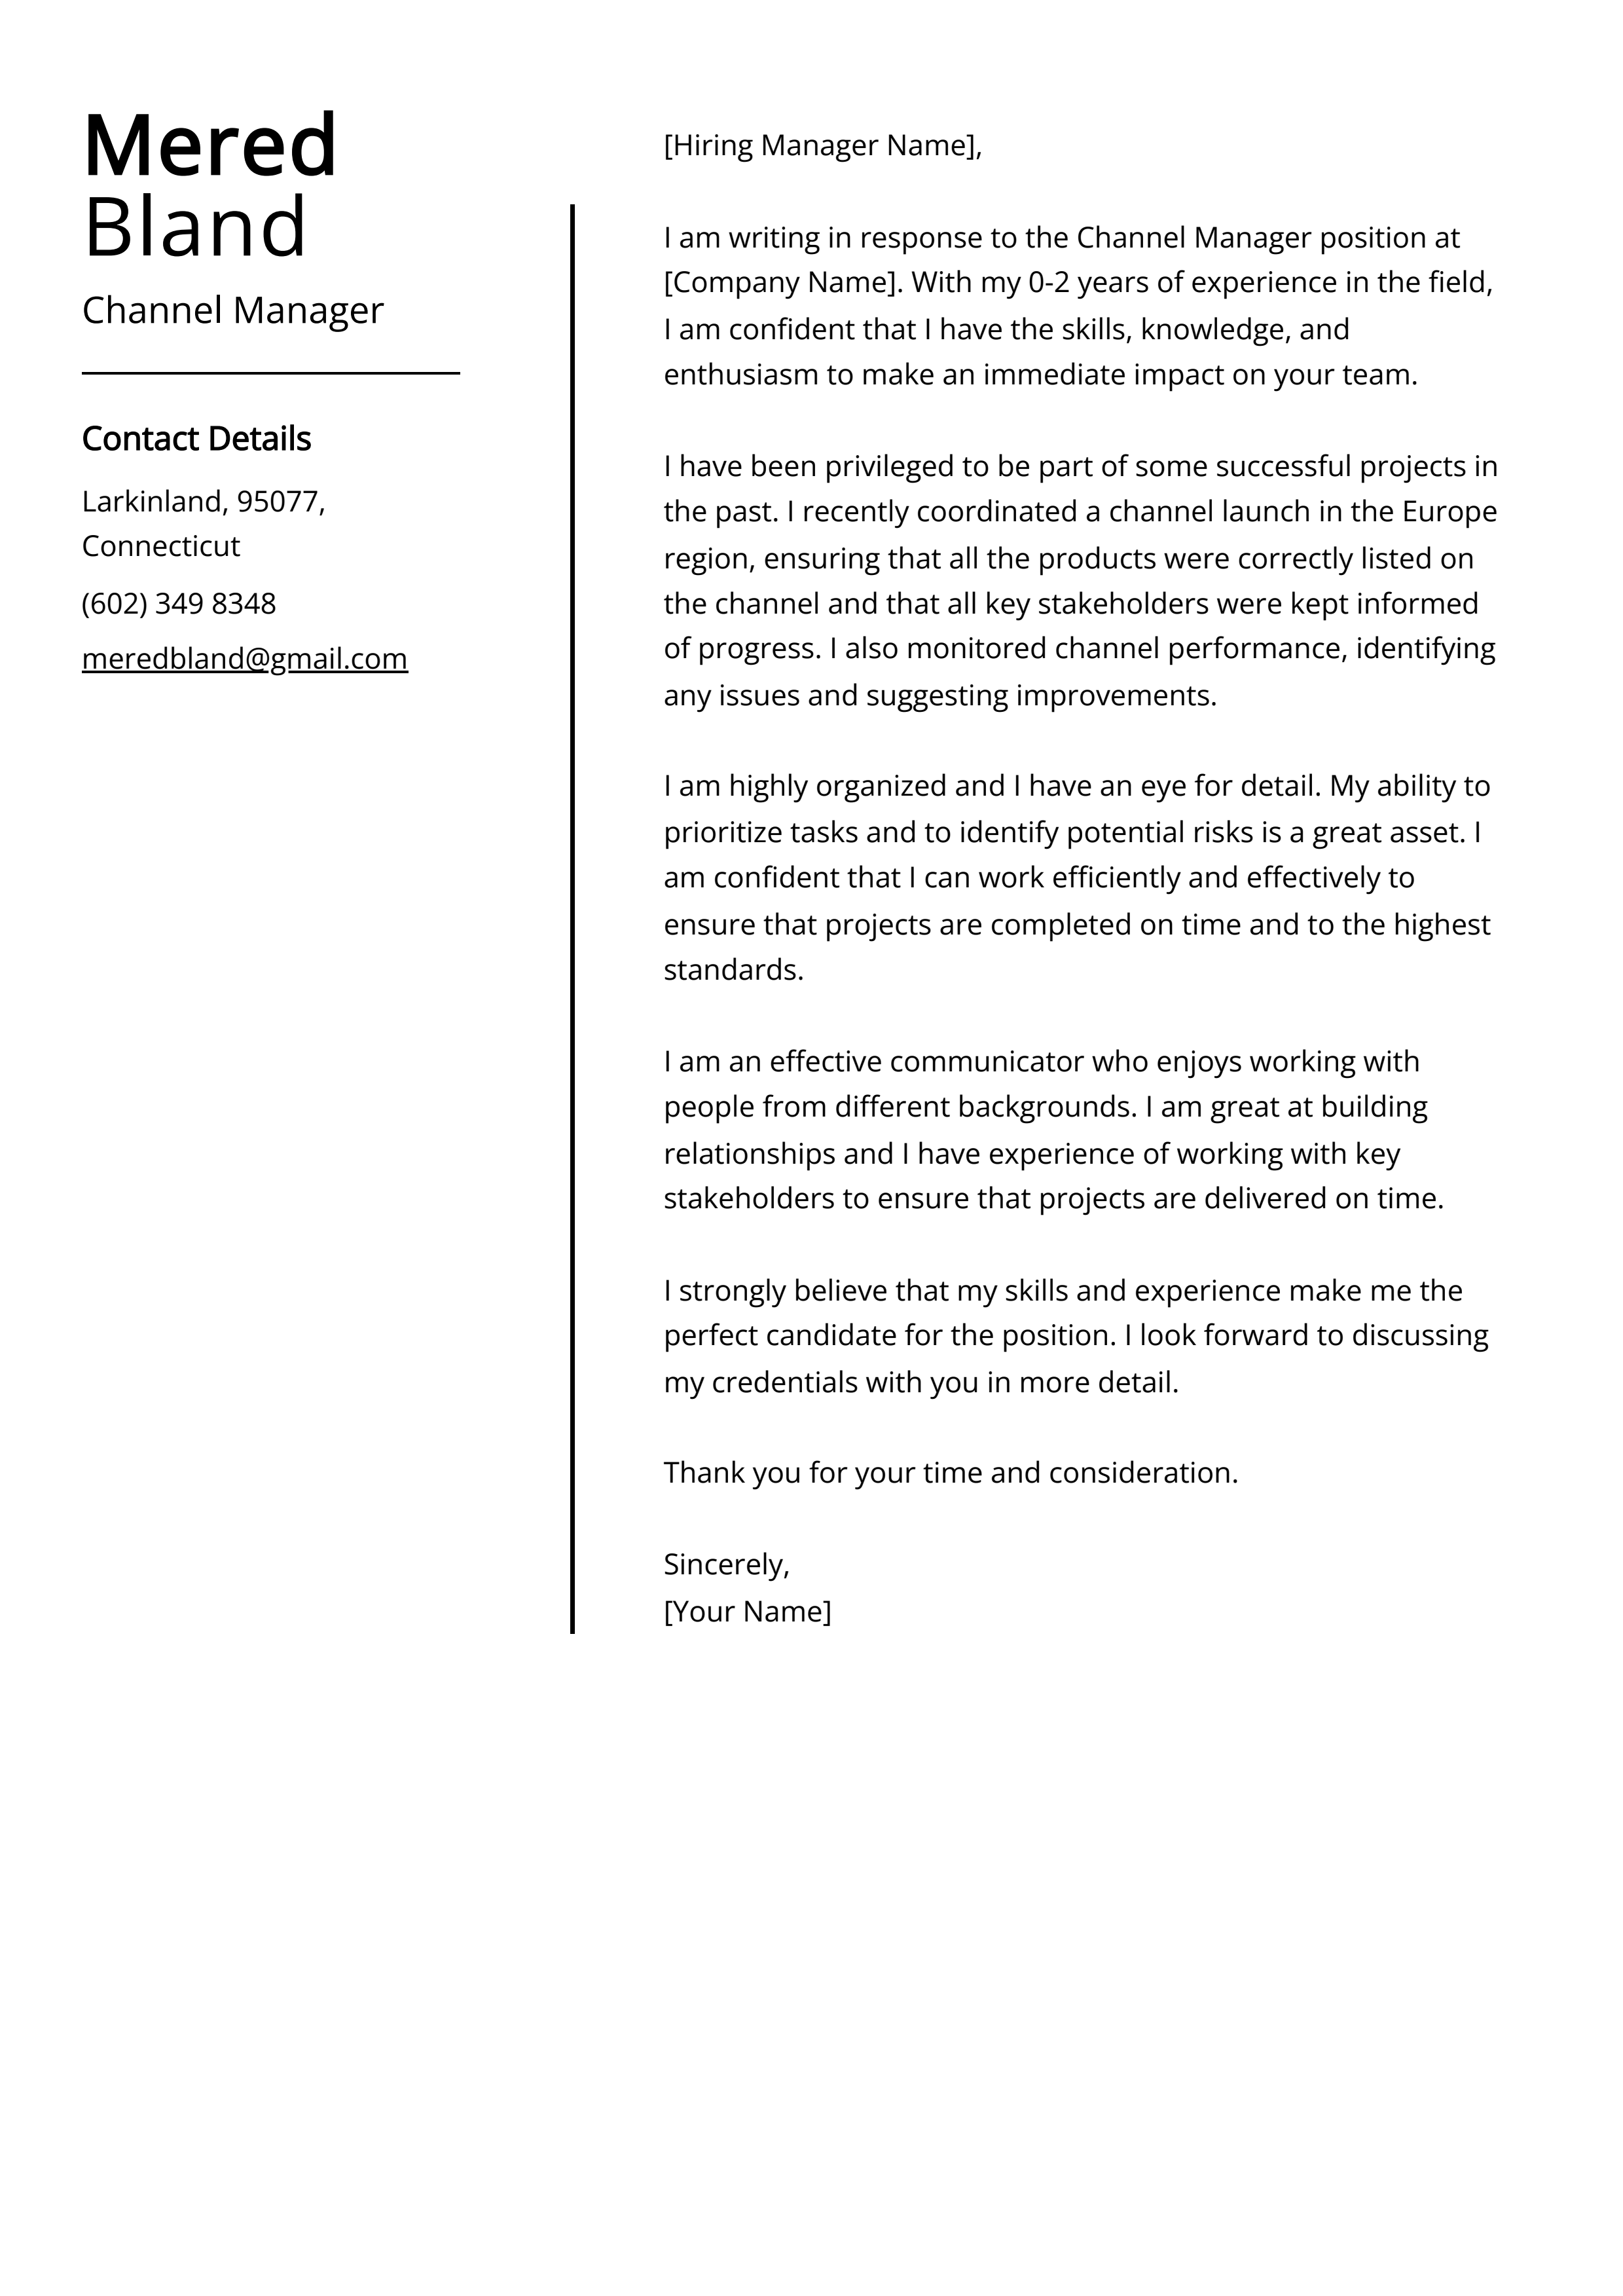 Channel Manager Cover Letter Example